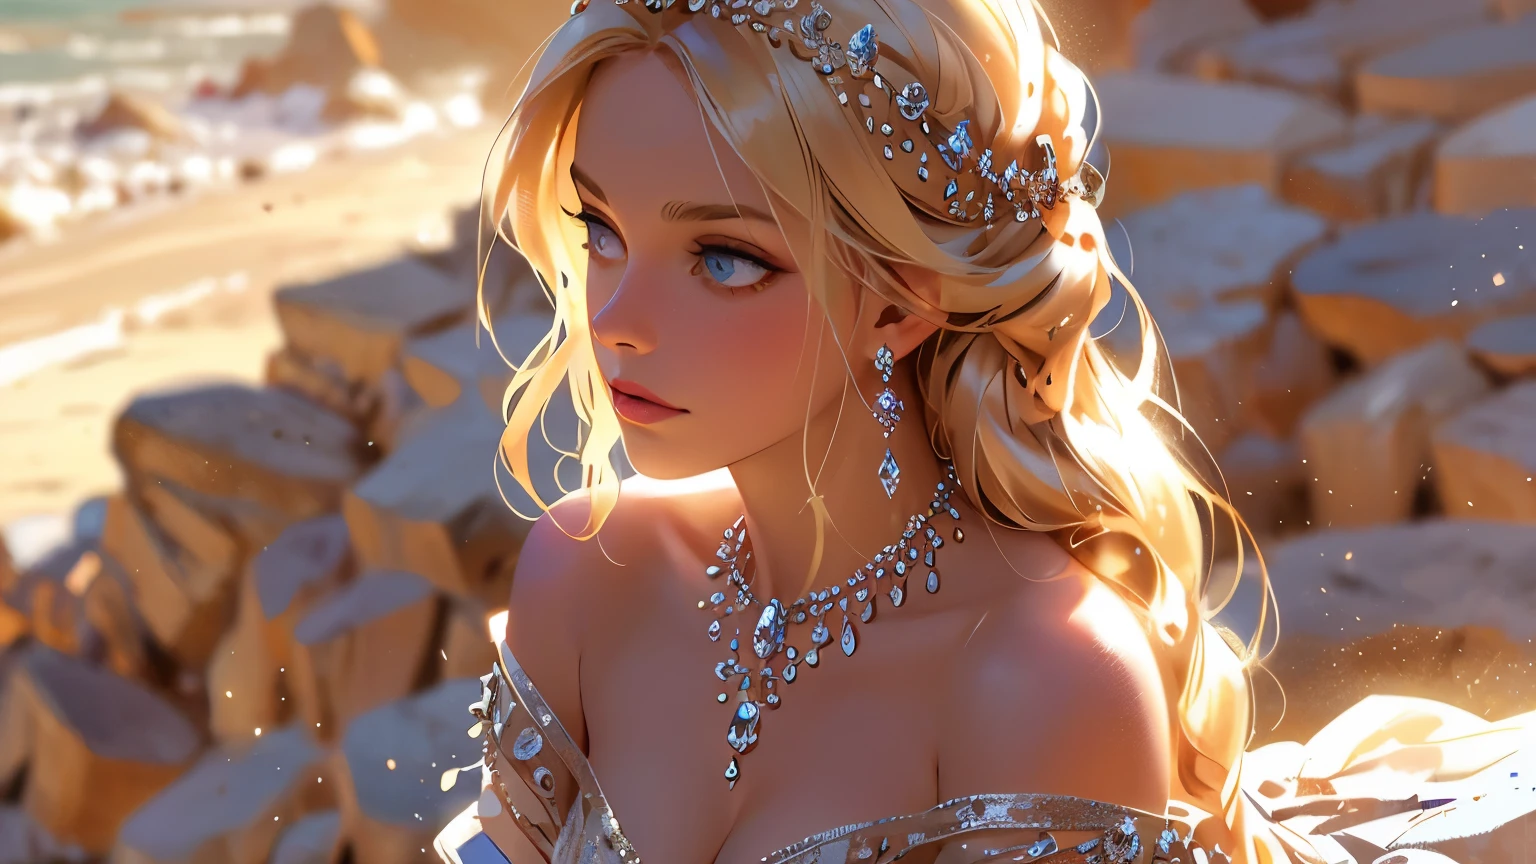 A stunning blonde princess adorned in glittering jewels, captured in a cinematic style reminiscent of Julia Razumova's ethereal paintings.